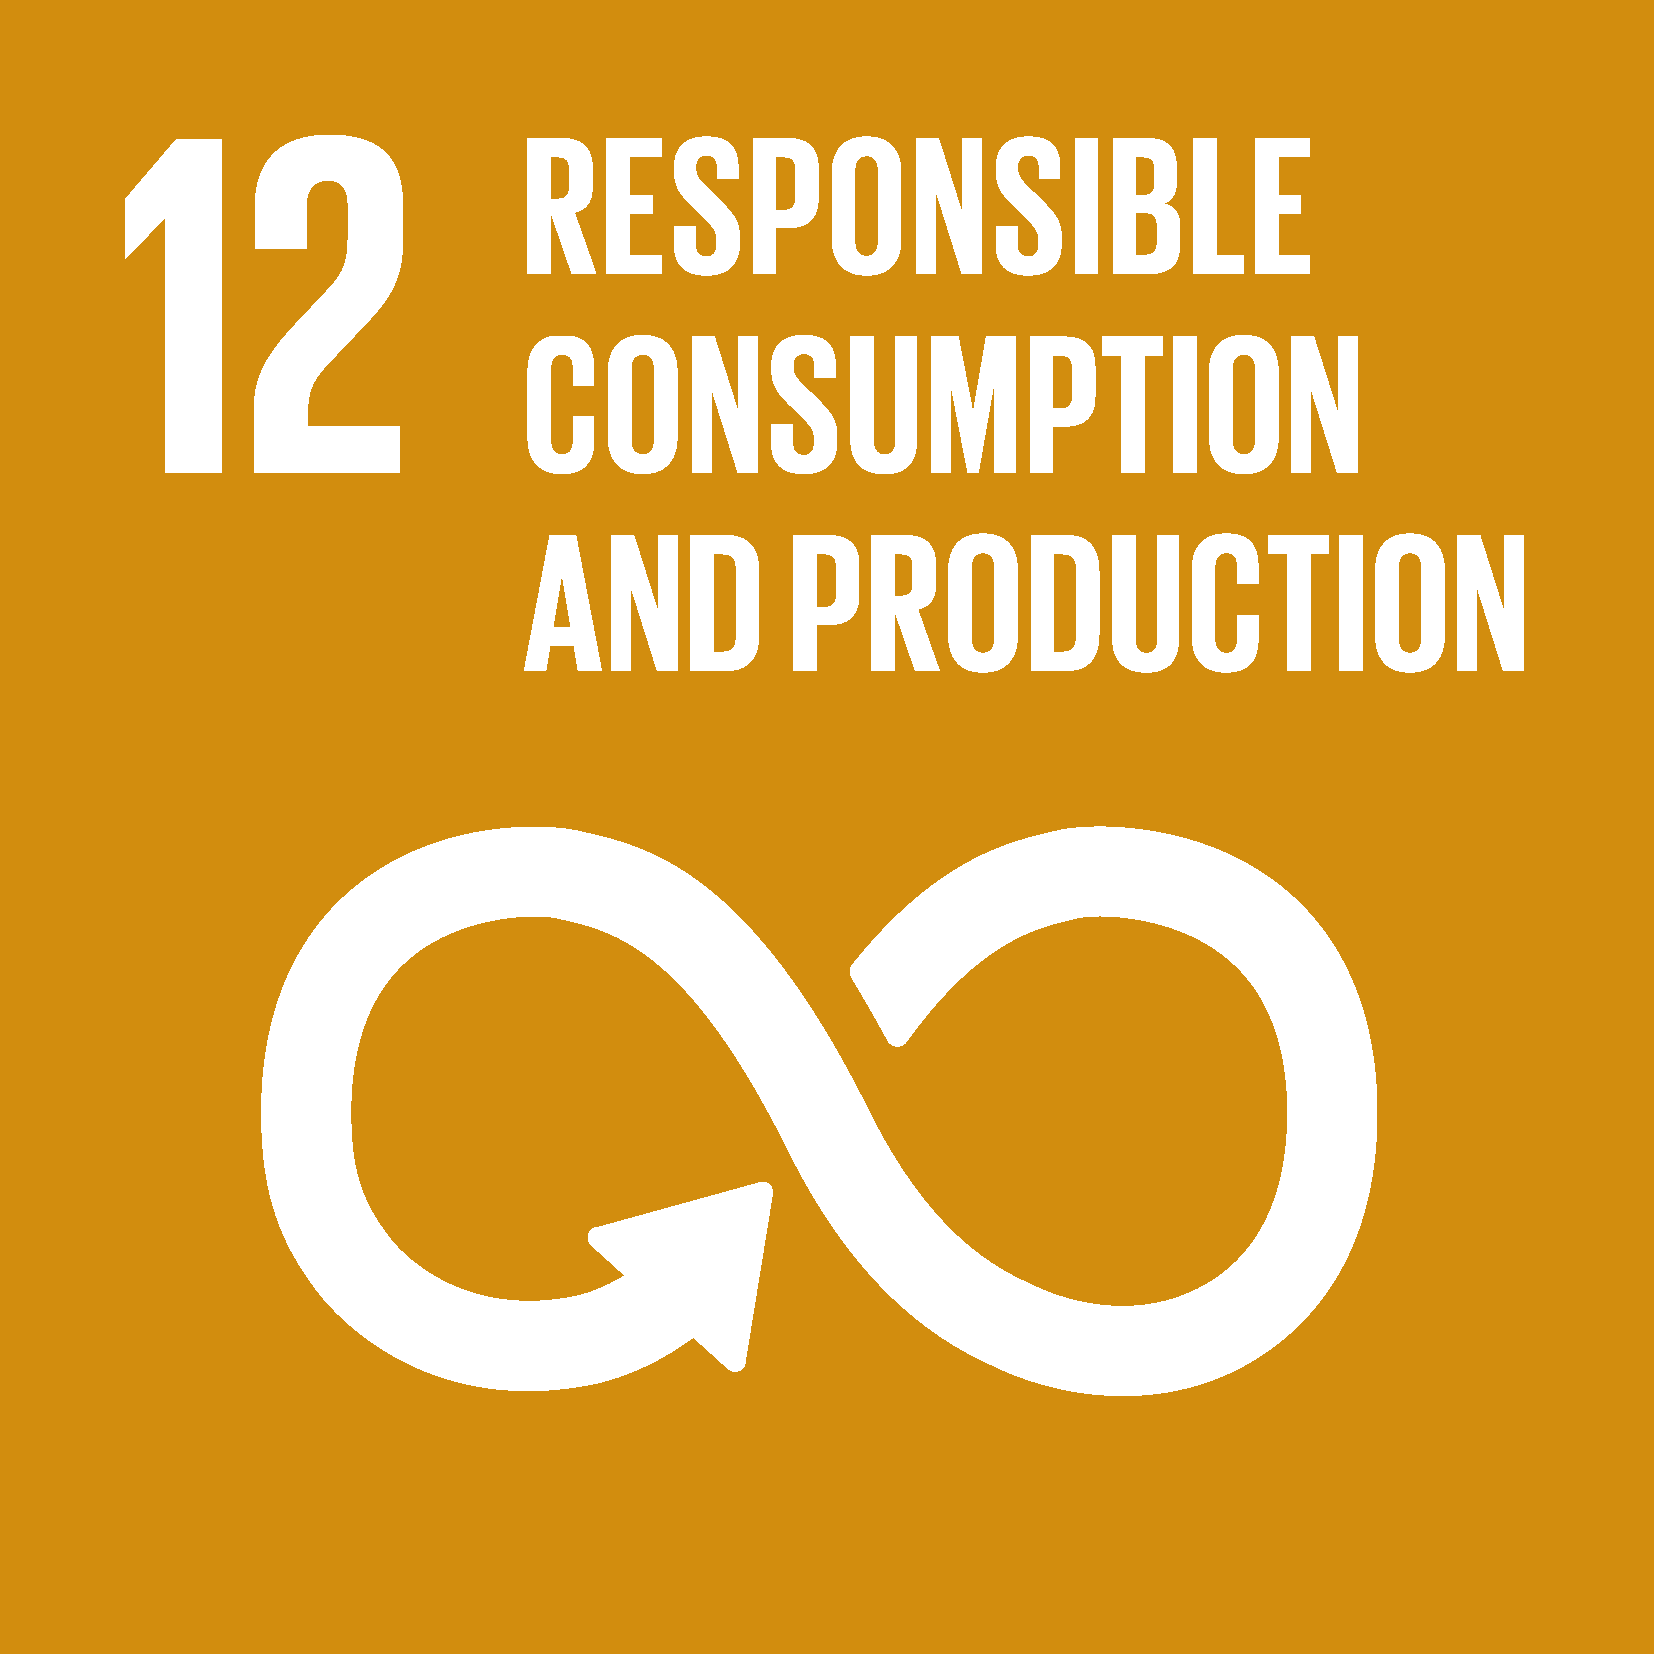 The Global Goal 12 responsible consumption and production